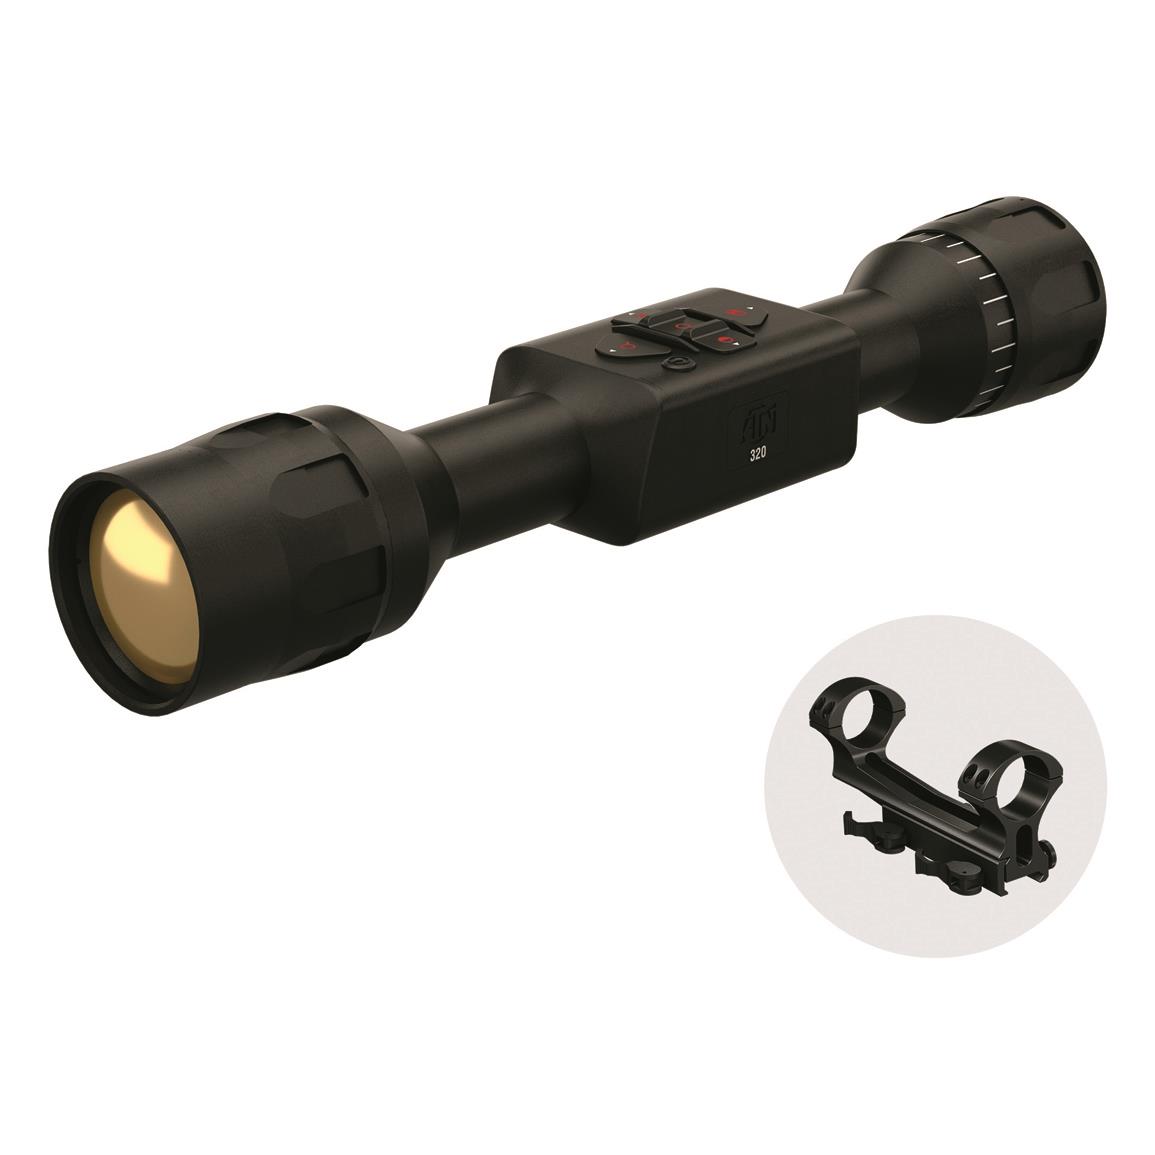 ATN ThOR LT 320 5-10x Thermal Rifle Scope with Dual Ring Cantilever Mount